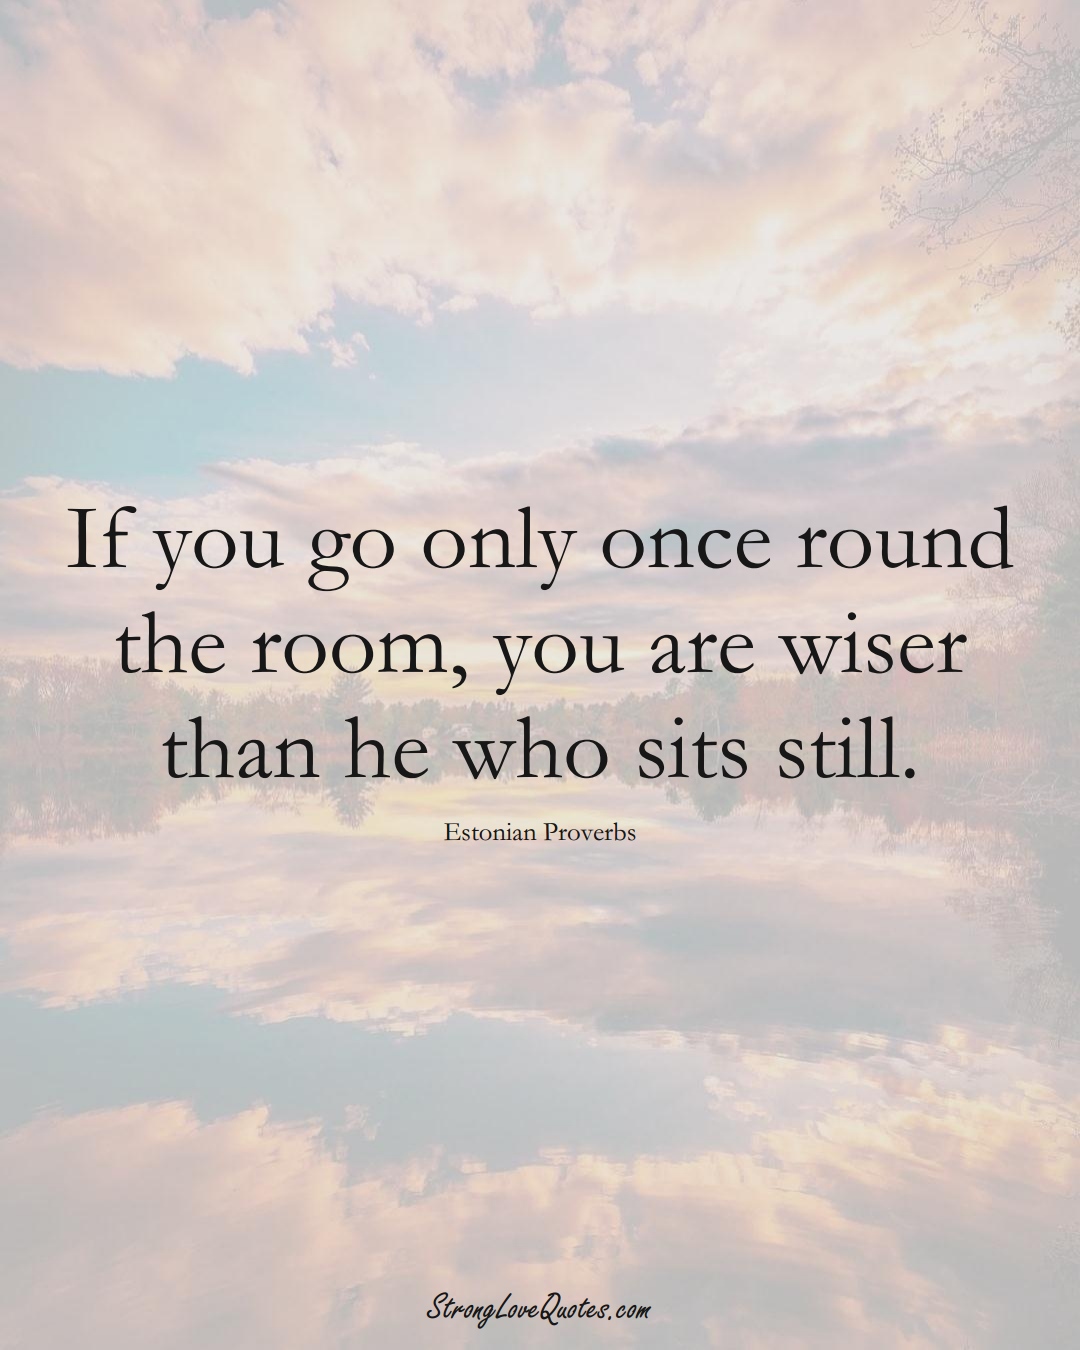 If you go only once round the room, you are wiser than he who sits still. (Estonian Sayings);  #EuropeanSayings